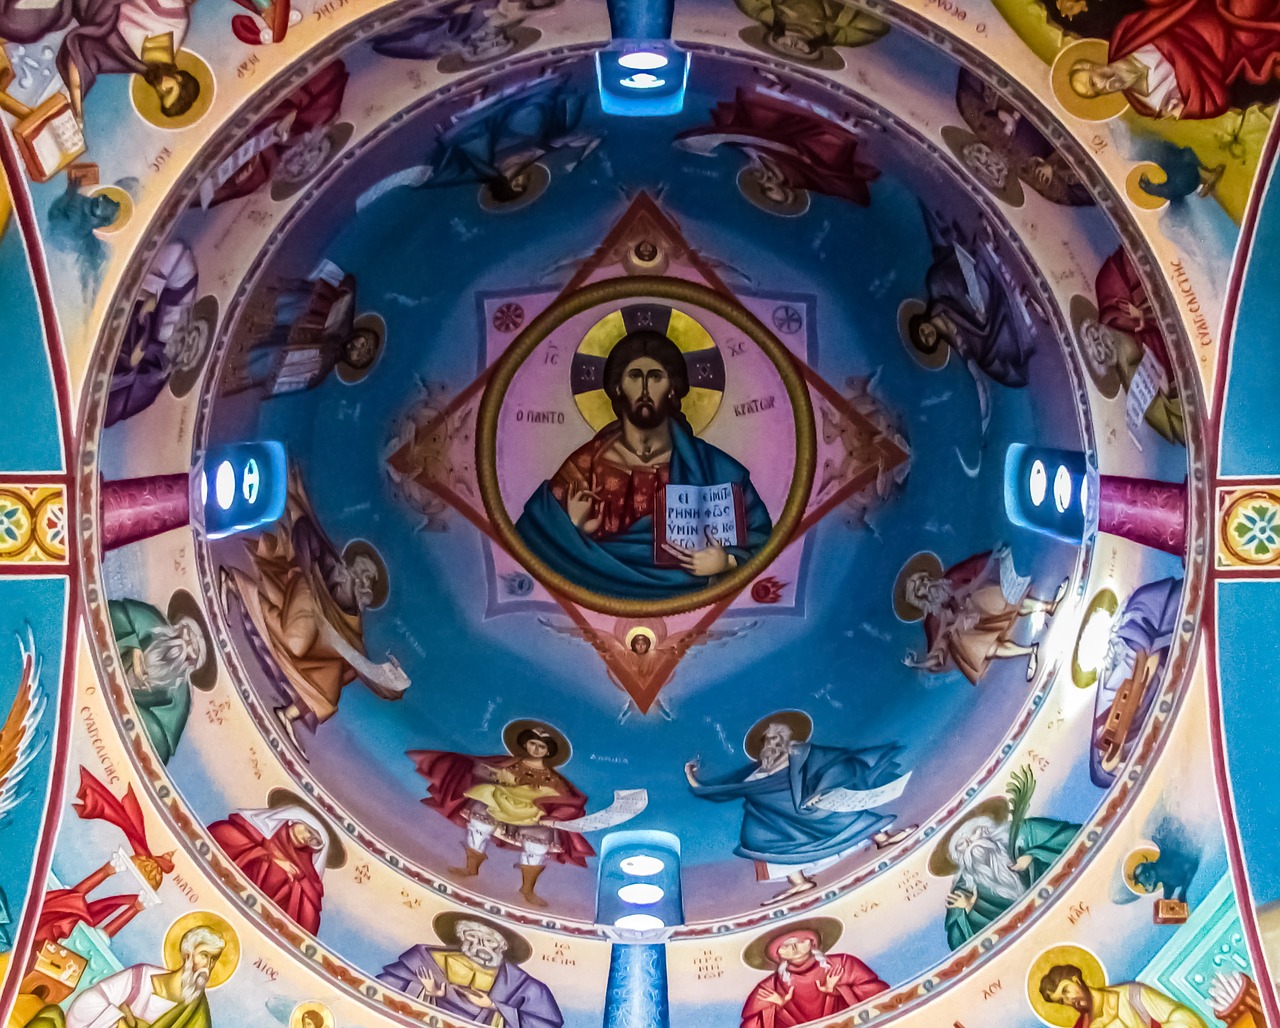 Download free photo of Pantocrator,jesus christ,iconography,ceiling ...